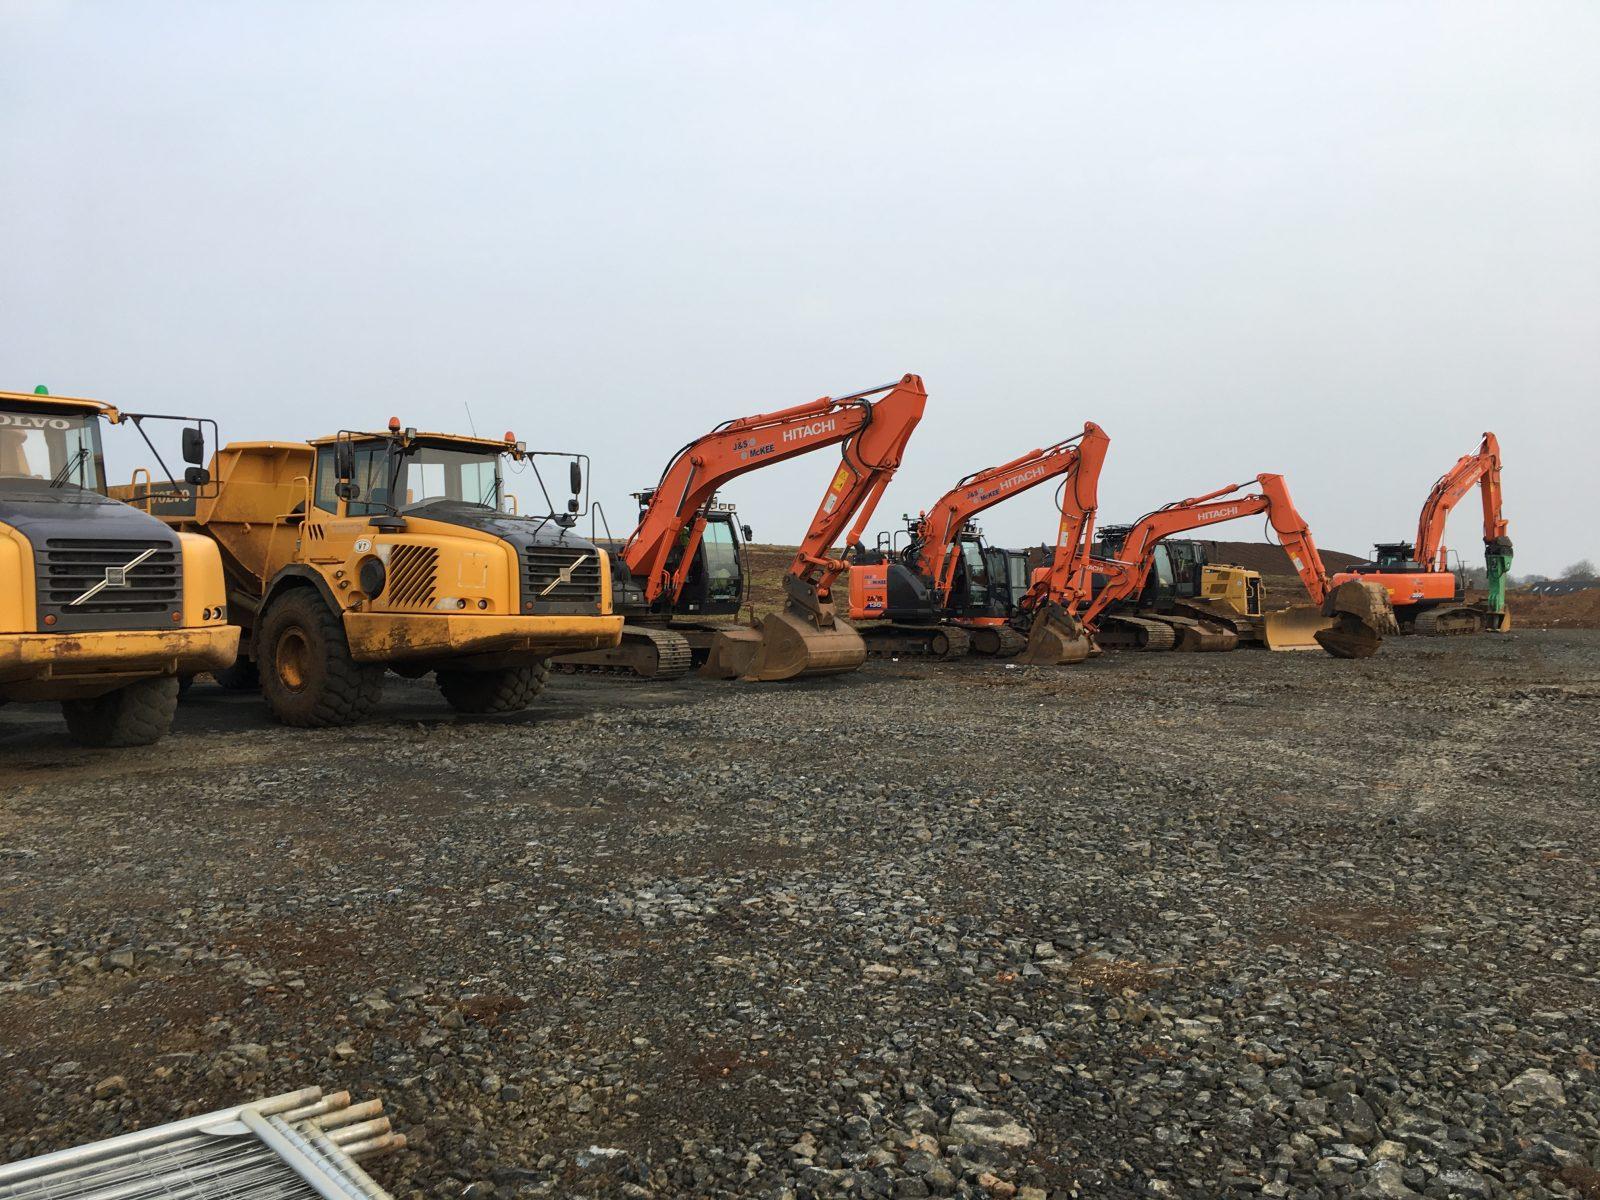 A rare time on site when machines can park up together